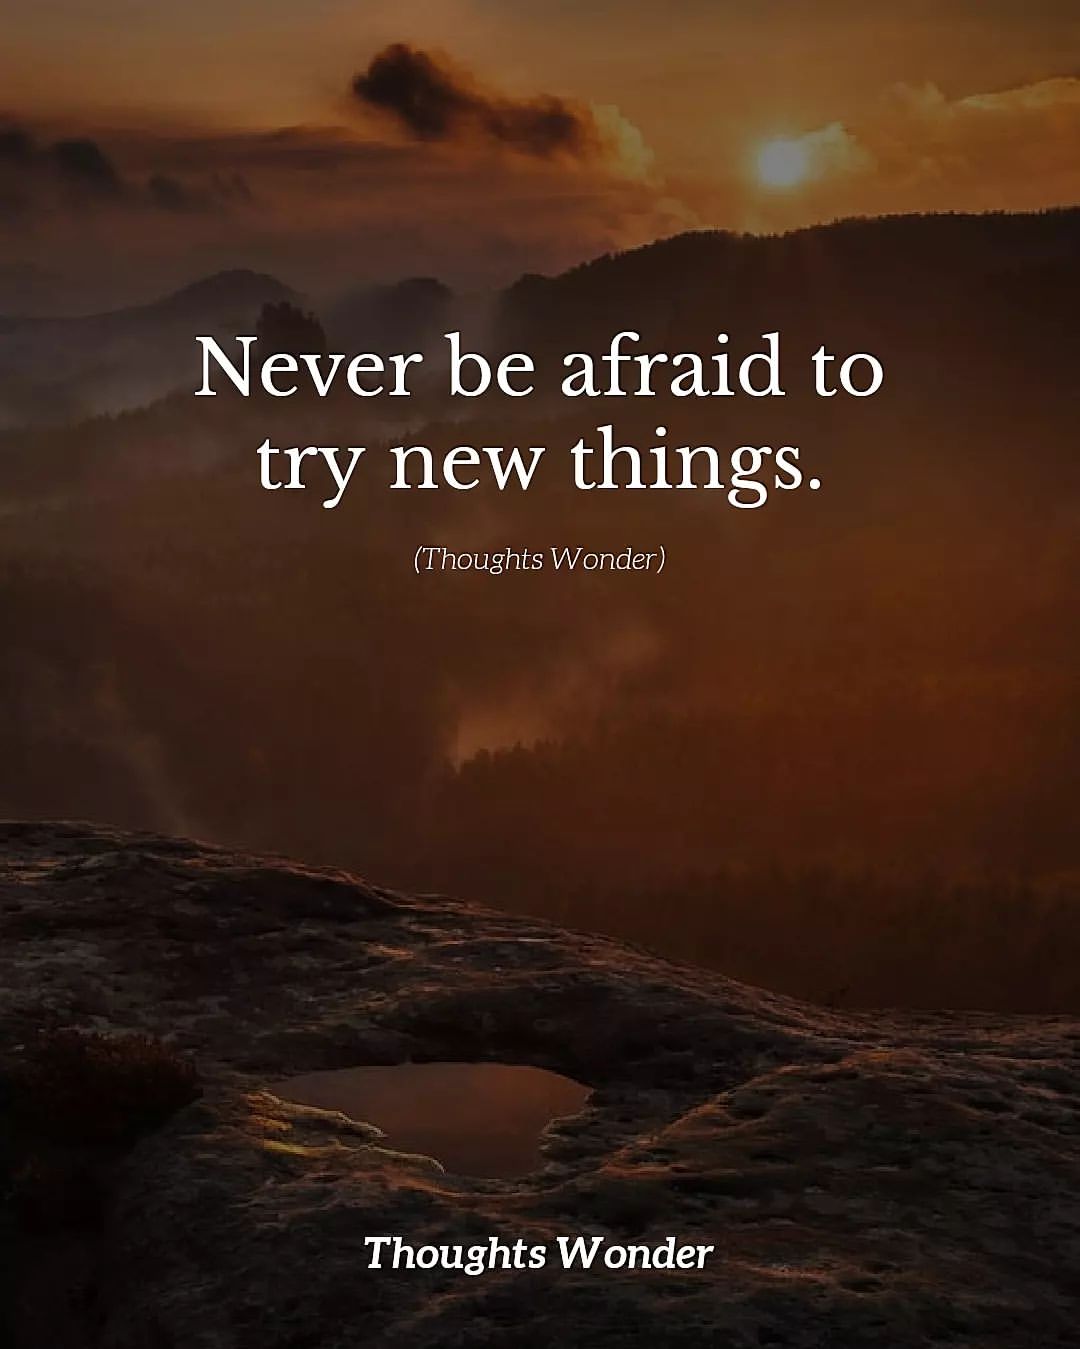 Never be afraid to try new things.